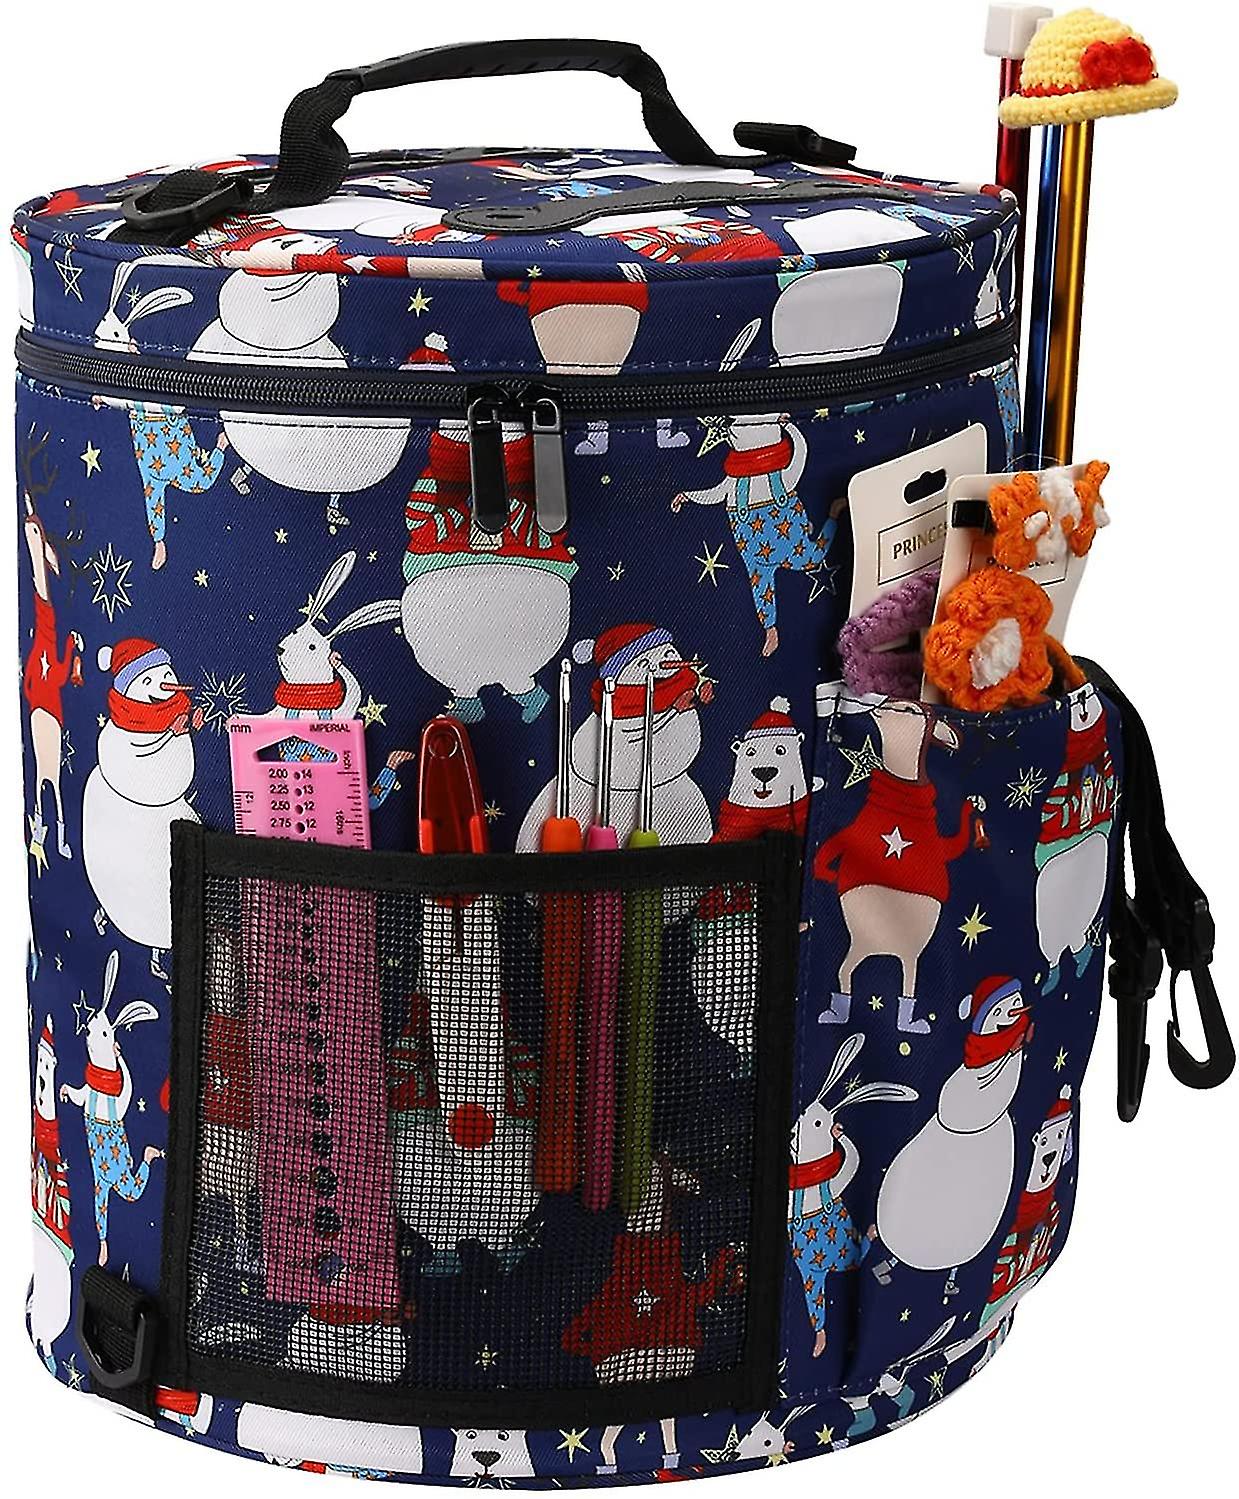 Knitting Bag， Crochet Projects Bag， Knitting Bags For Wool And Needles Storage， Wool Storage Bag， Yarn Holder Knitting Organizers ， Snowman